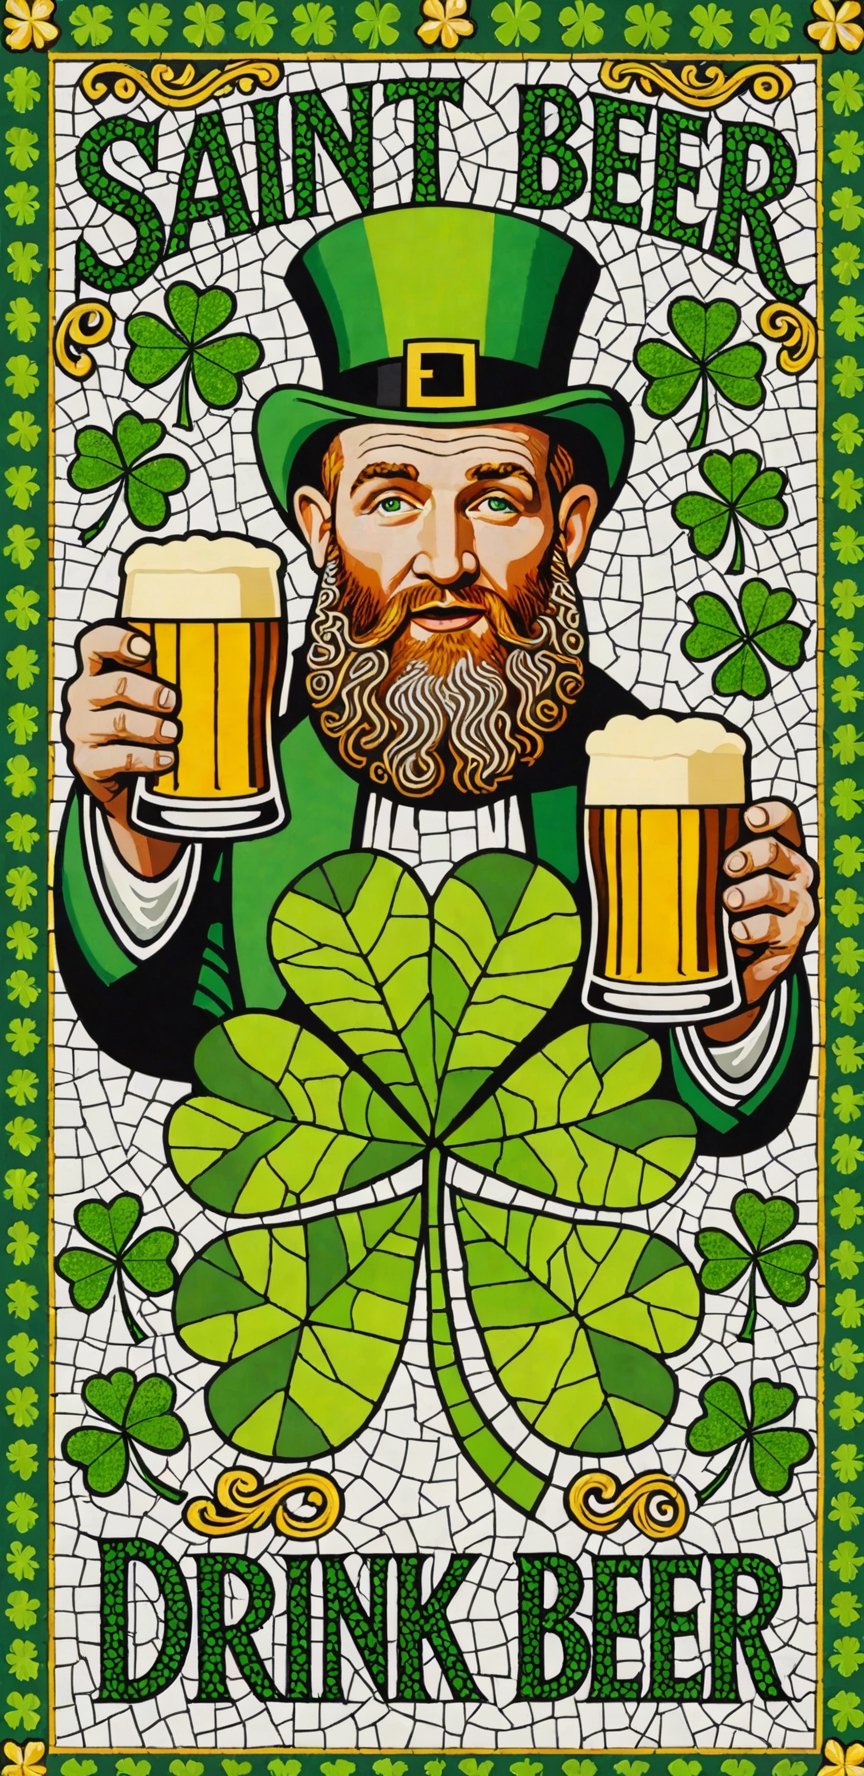 (masterpiece, best quality, ultra-detailed), Image of Saint Patrick, four leaf clover mosaic, with text that says "Drink Beer"